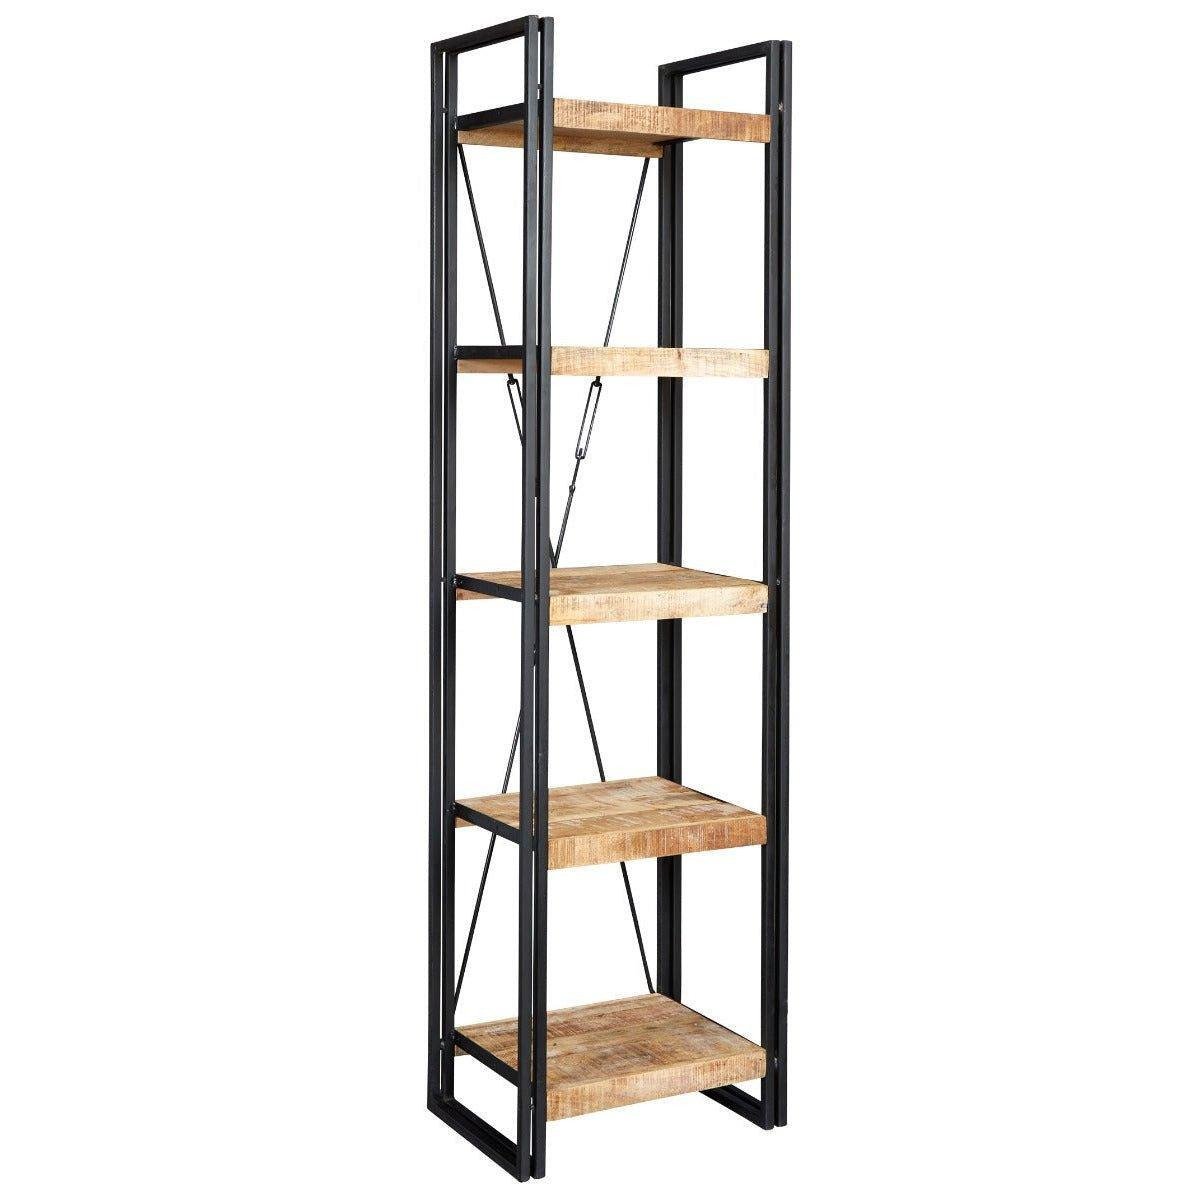 Franciscan Up cycled Industrial Mintis Narrow Open Bookcase - image 1